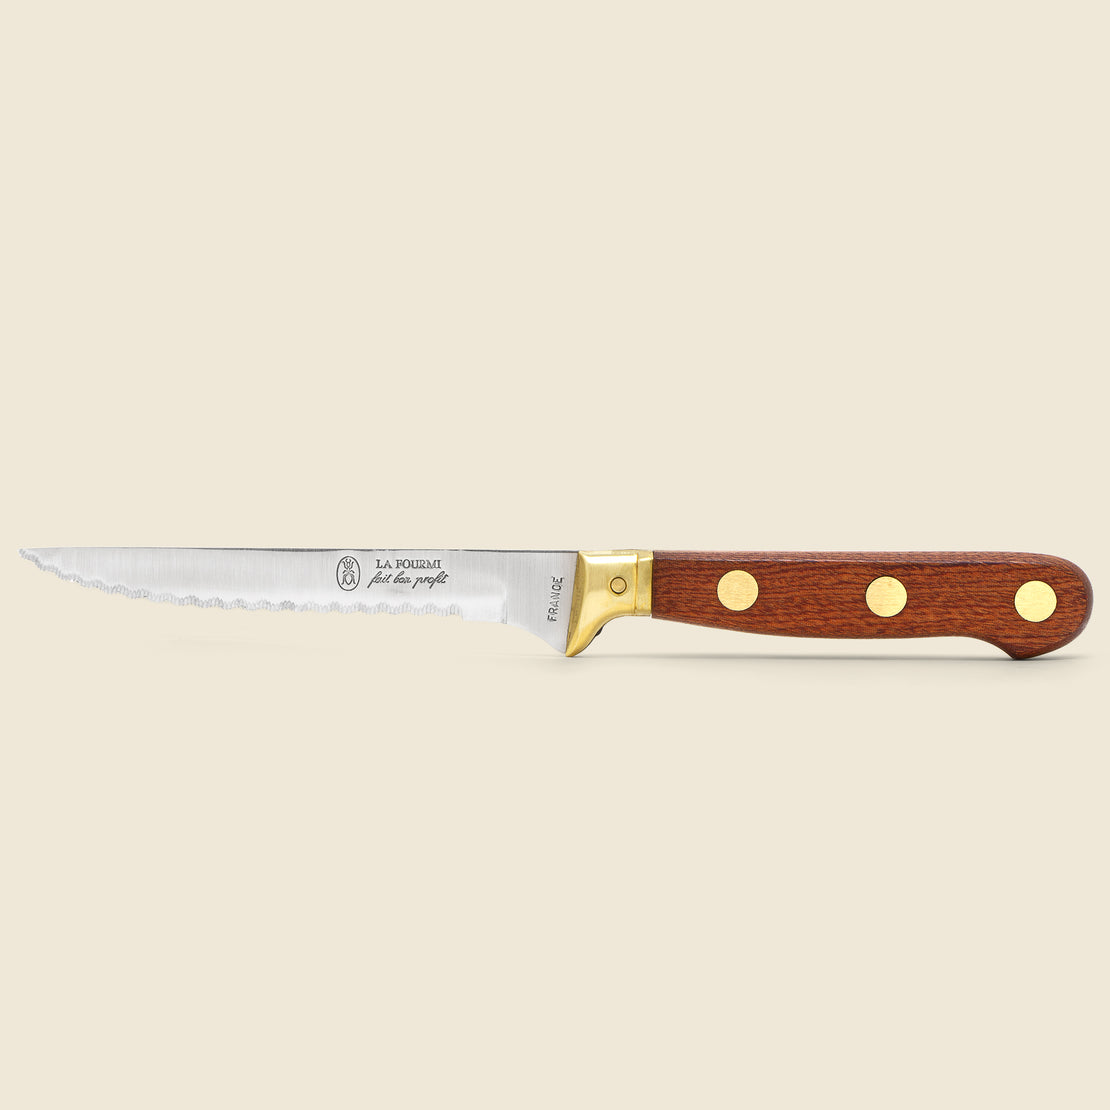 Rubberwood Steak Knife Set - Home - STAG Provisions - Home - Kitchen - Tabletop